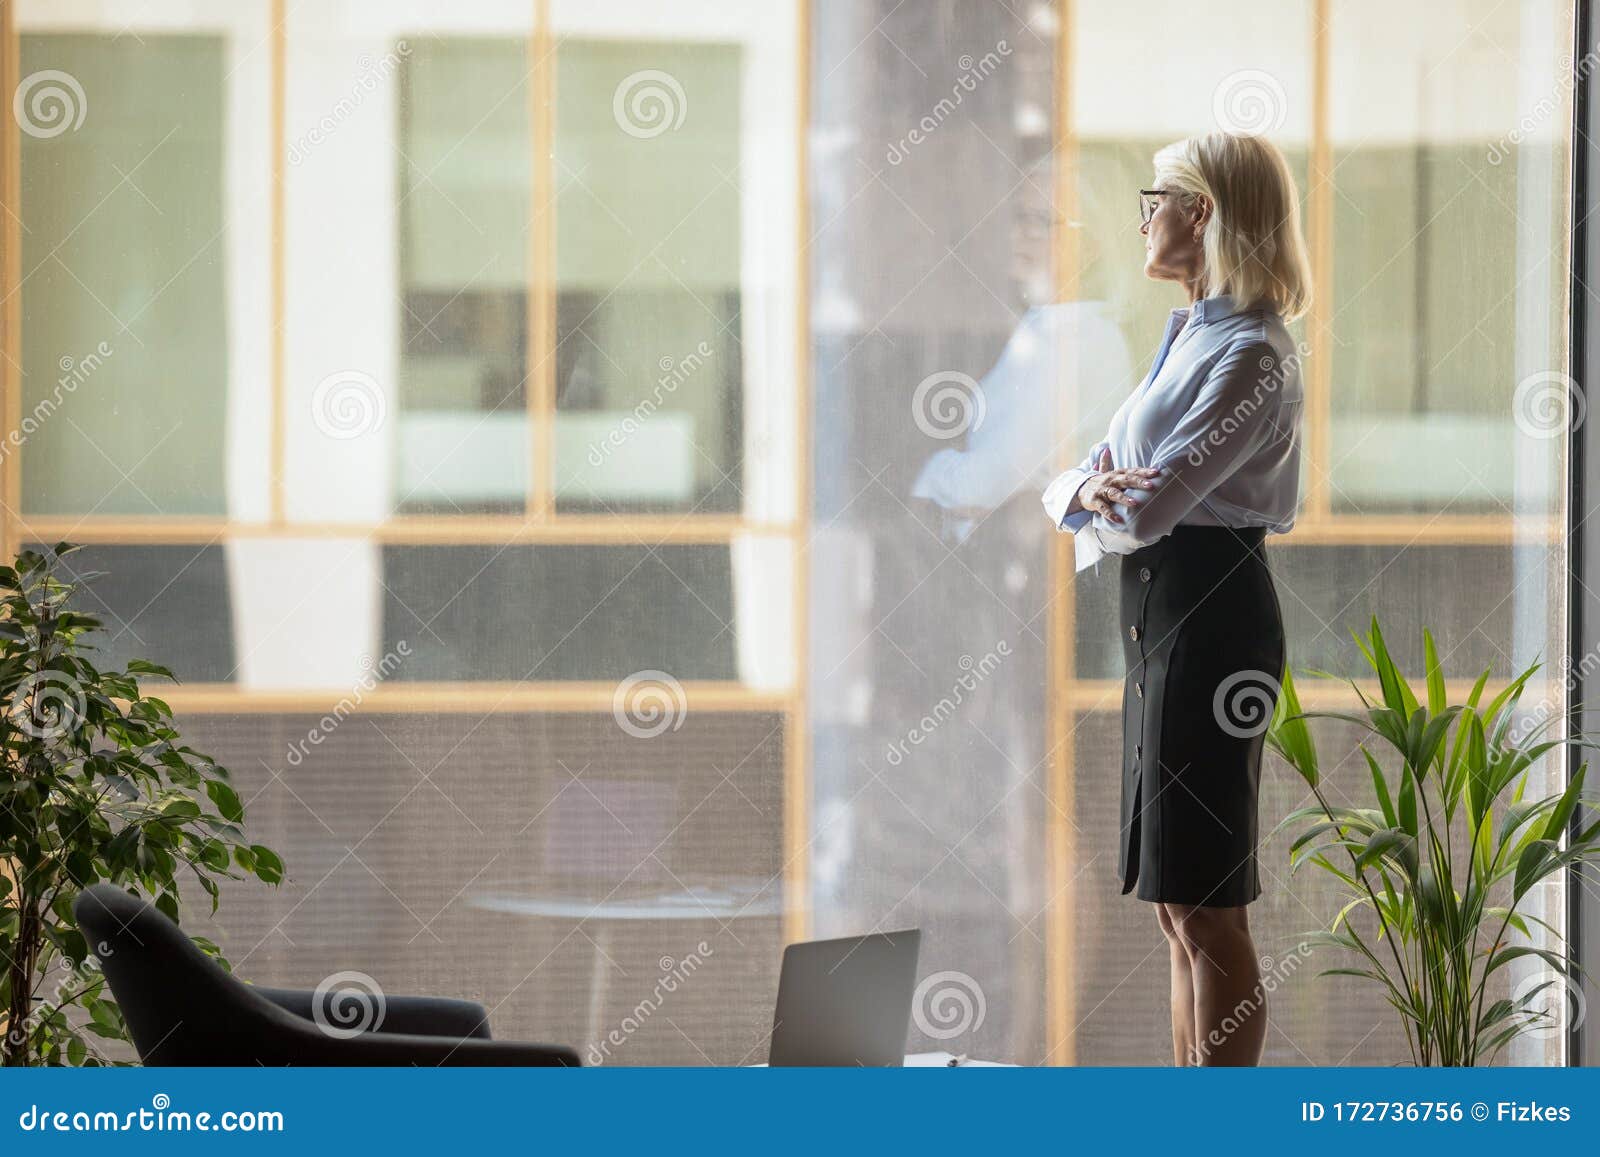 aged businesswoman looking out window dreaming about corporate goals realizations